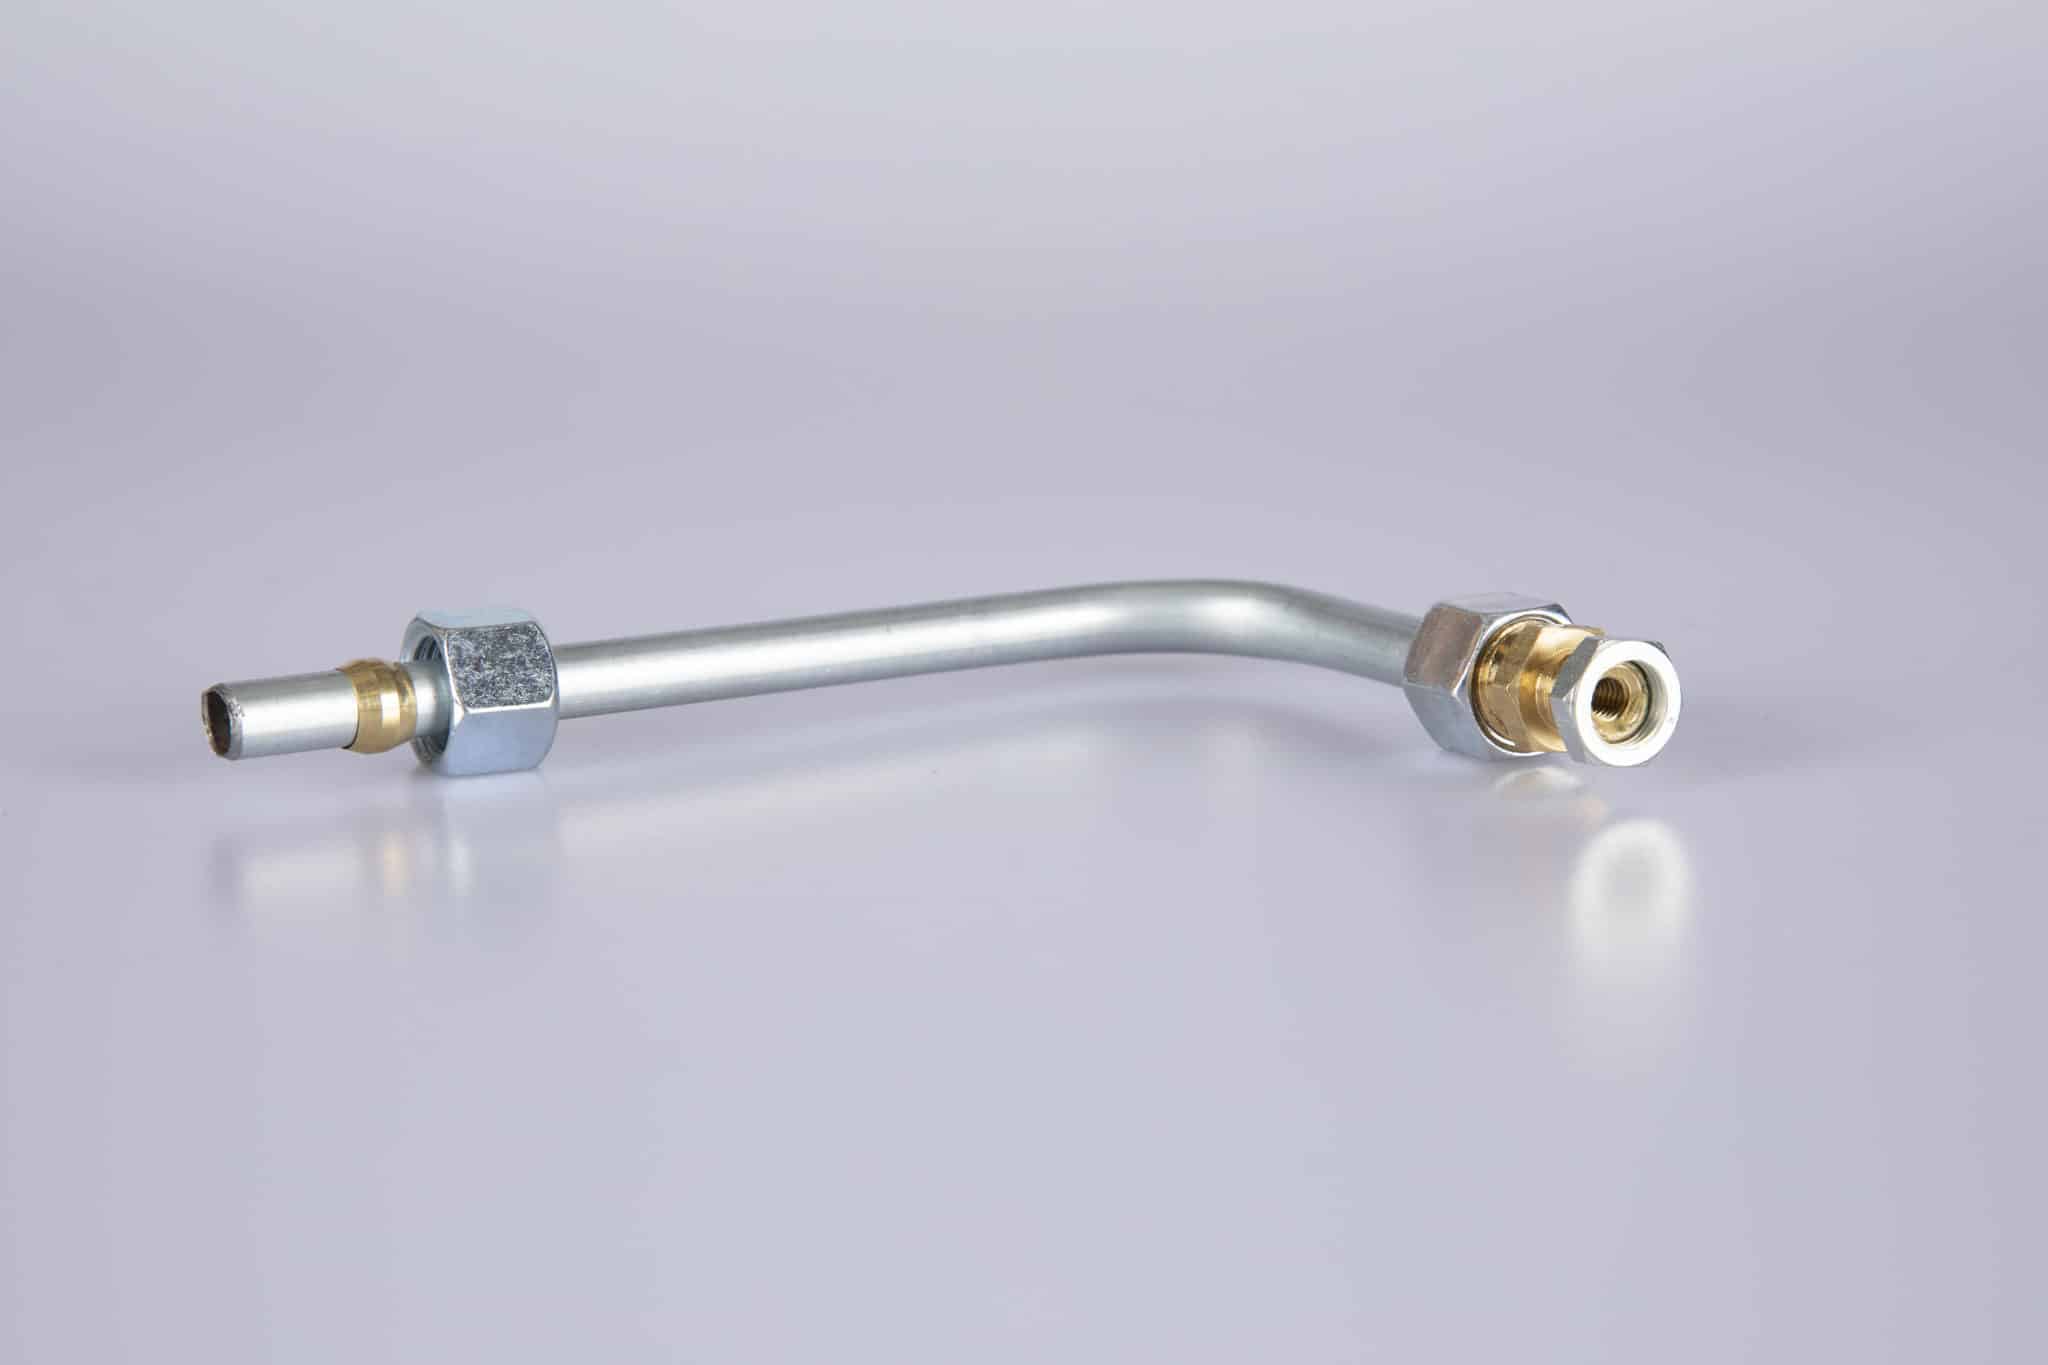 Archway Replacement Burner Gas Pipe 8mm – from Tee to Injector for our line of gas griddles